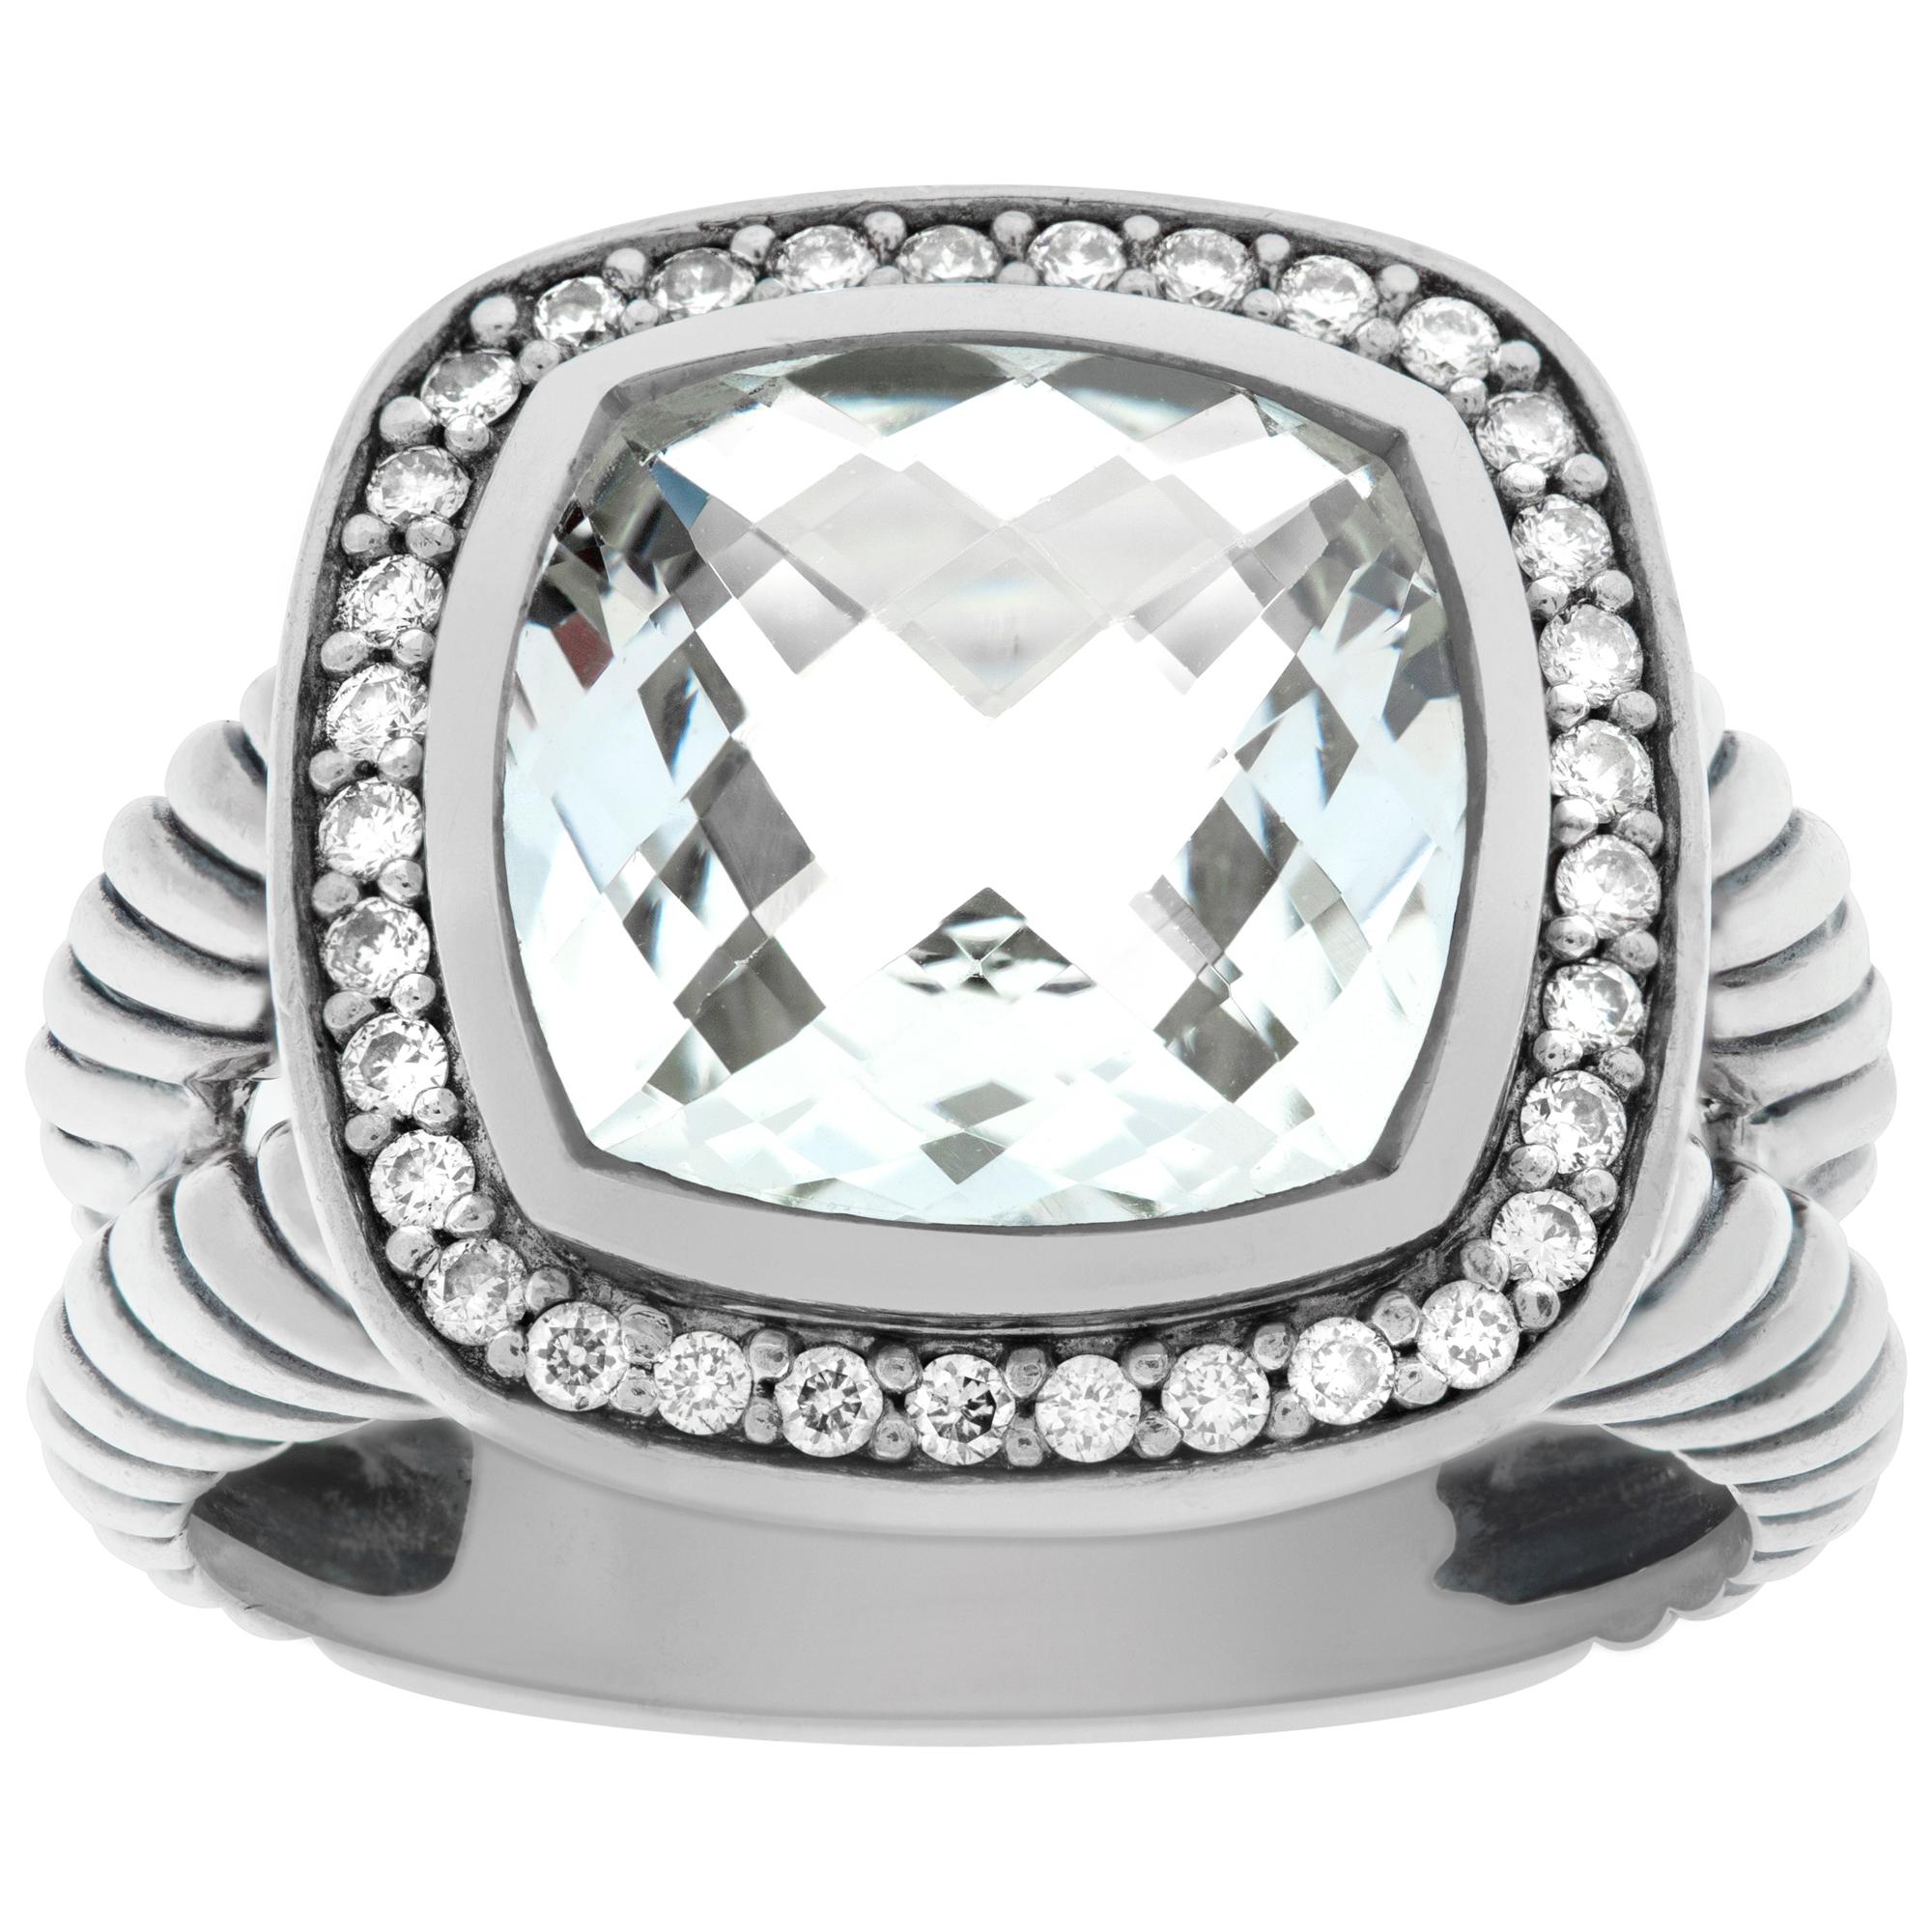 David Yurman Albion Prasiolite Ring in sterling silver with halo of round pave set diamonds (0.22 cts). Prasoilite weighs 9.2 carats. Size 6.5.This David Yurman ring is currently size 6.5 and some items can be sized up or down, please ask! It weighs